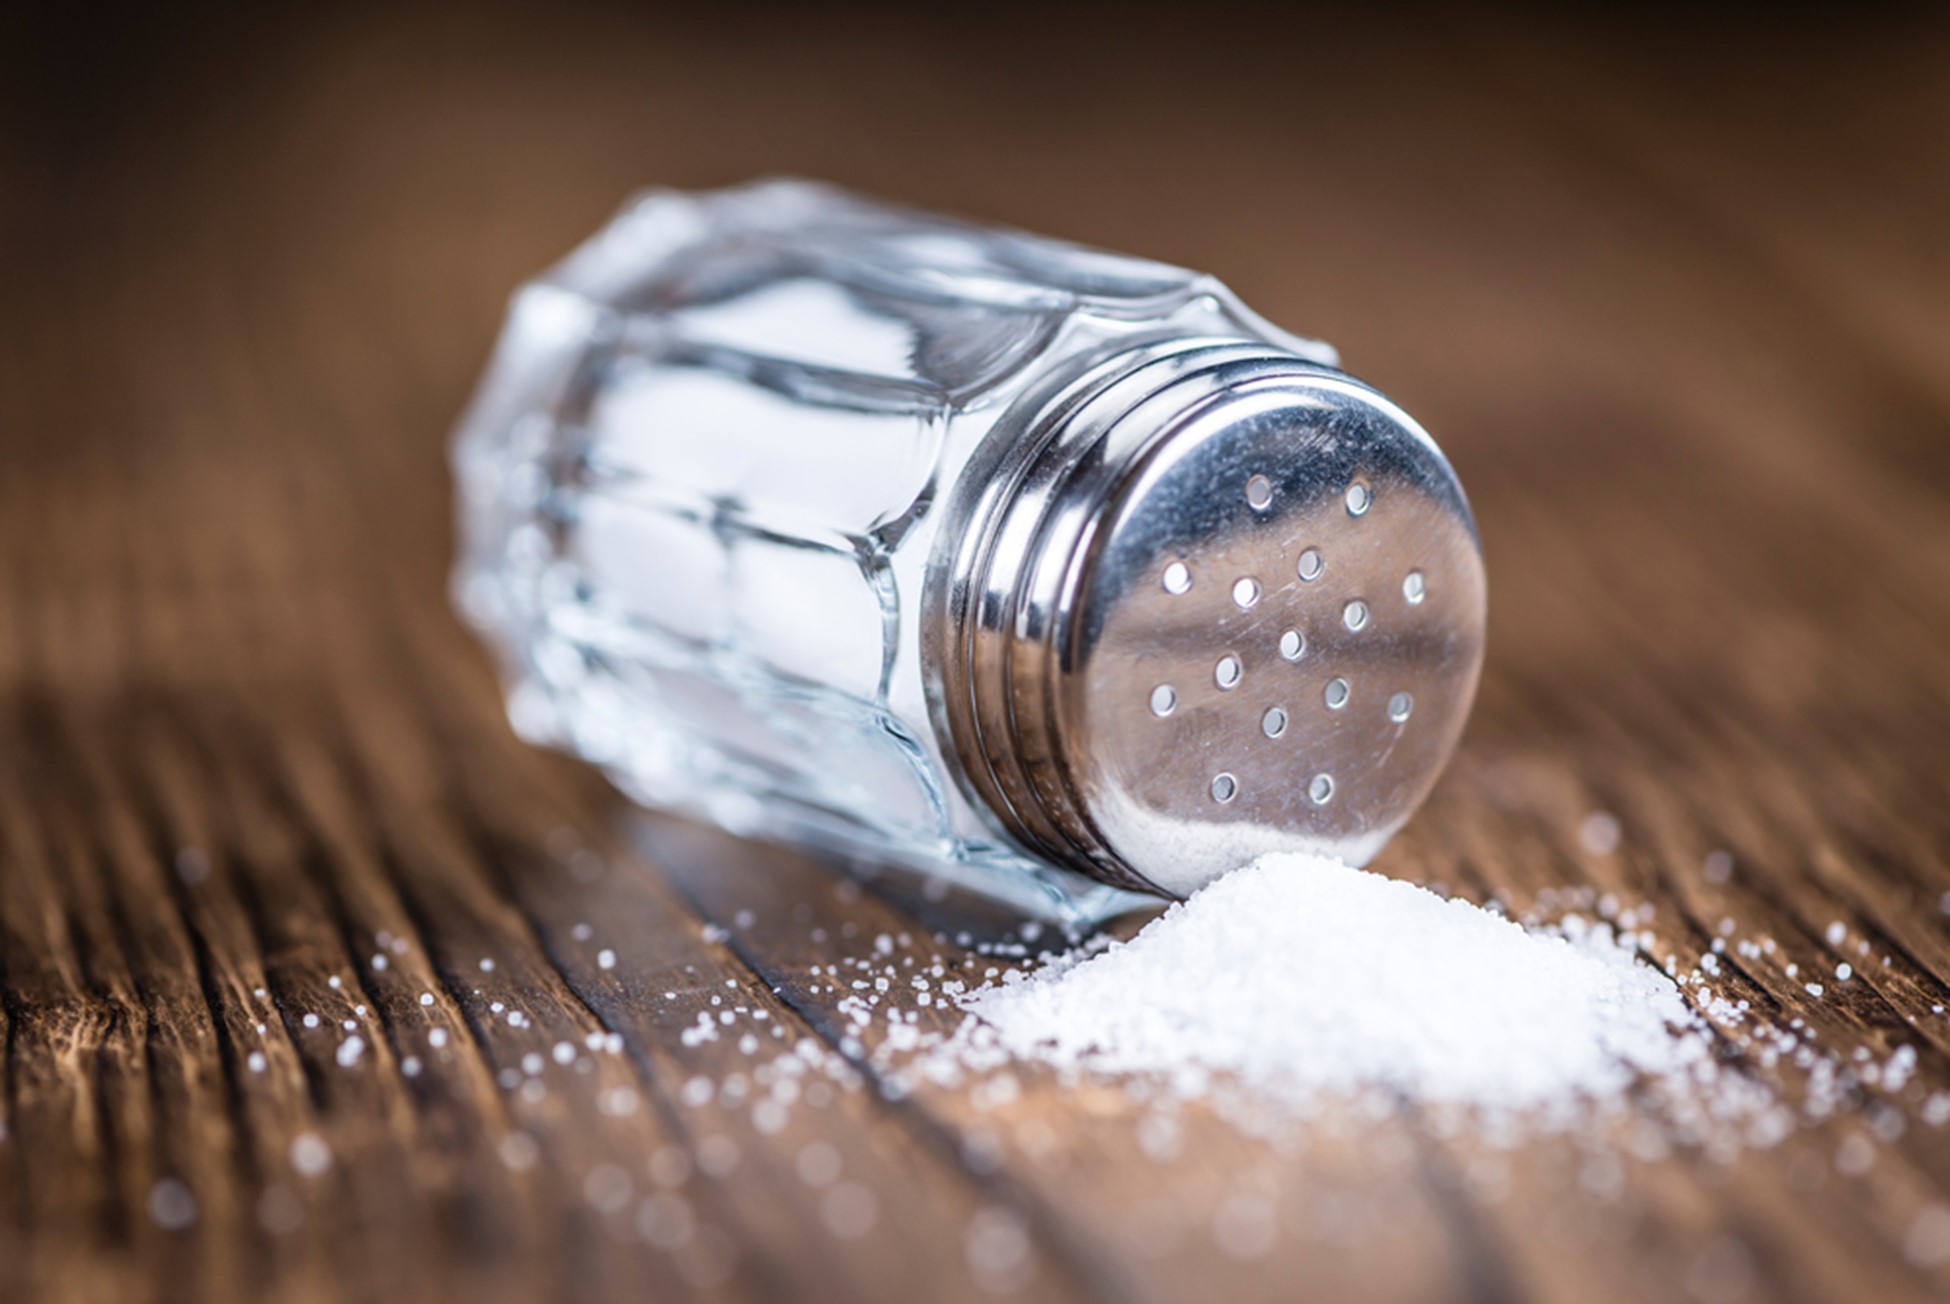 A closeup image of a tipped-over salt shaker against a wooden table.